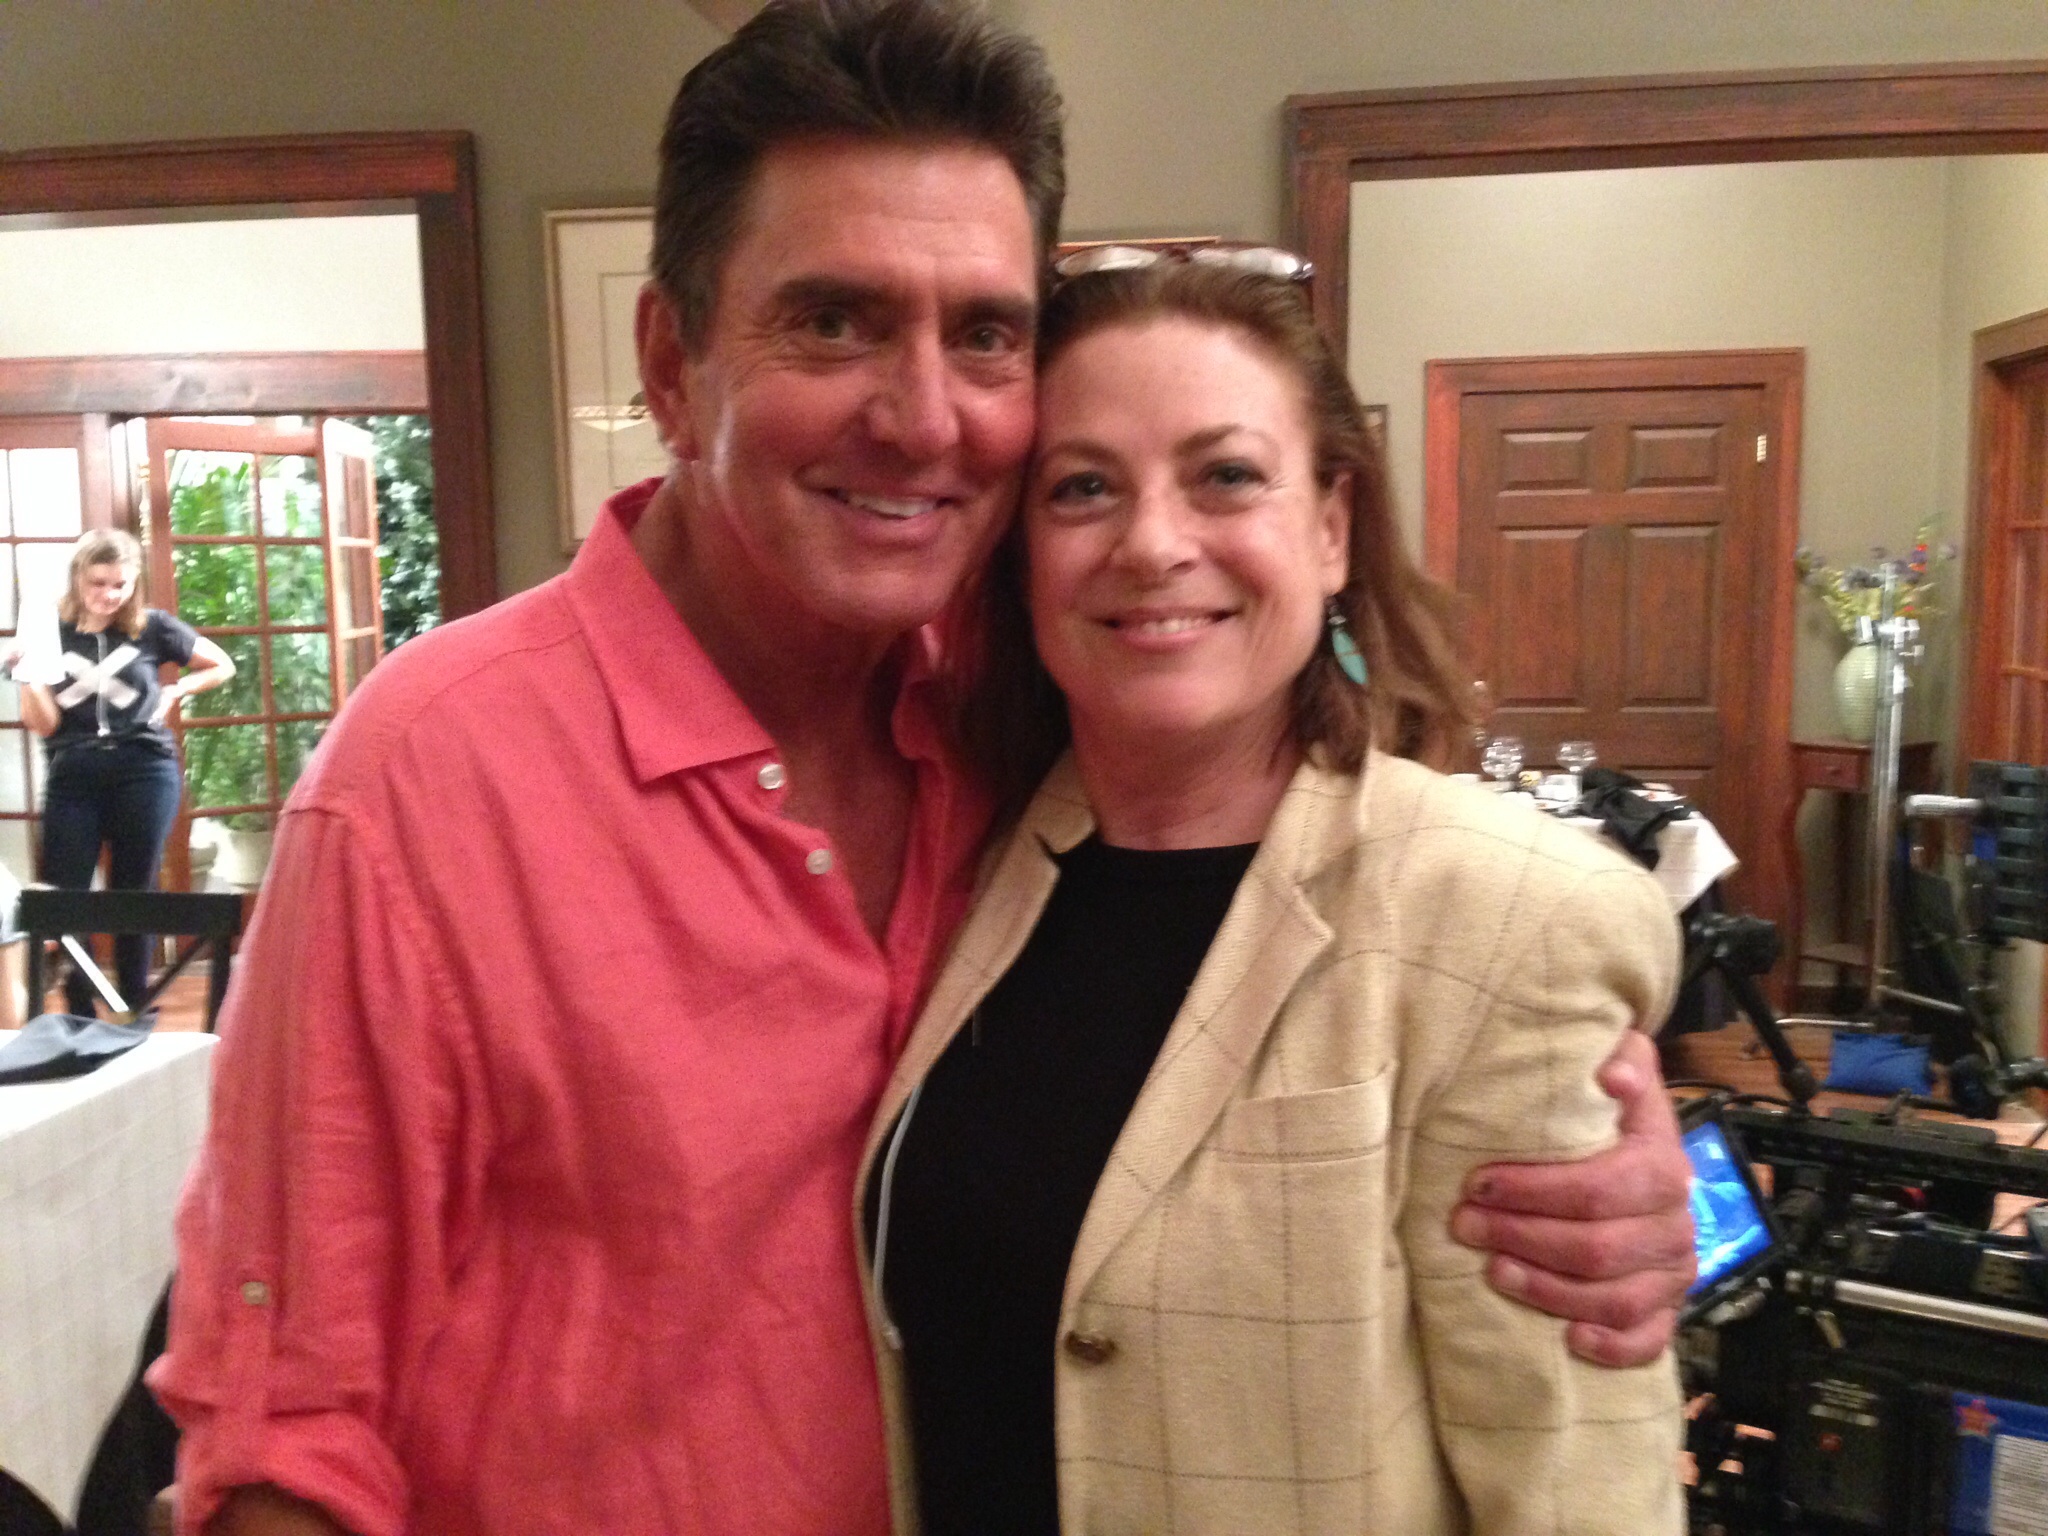 Bradford May and Wendy Girard on the set of 